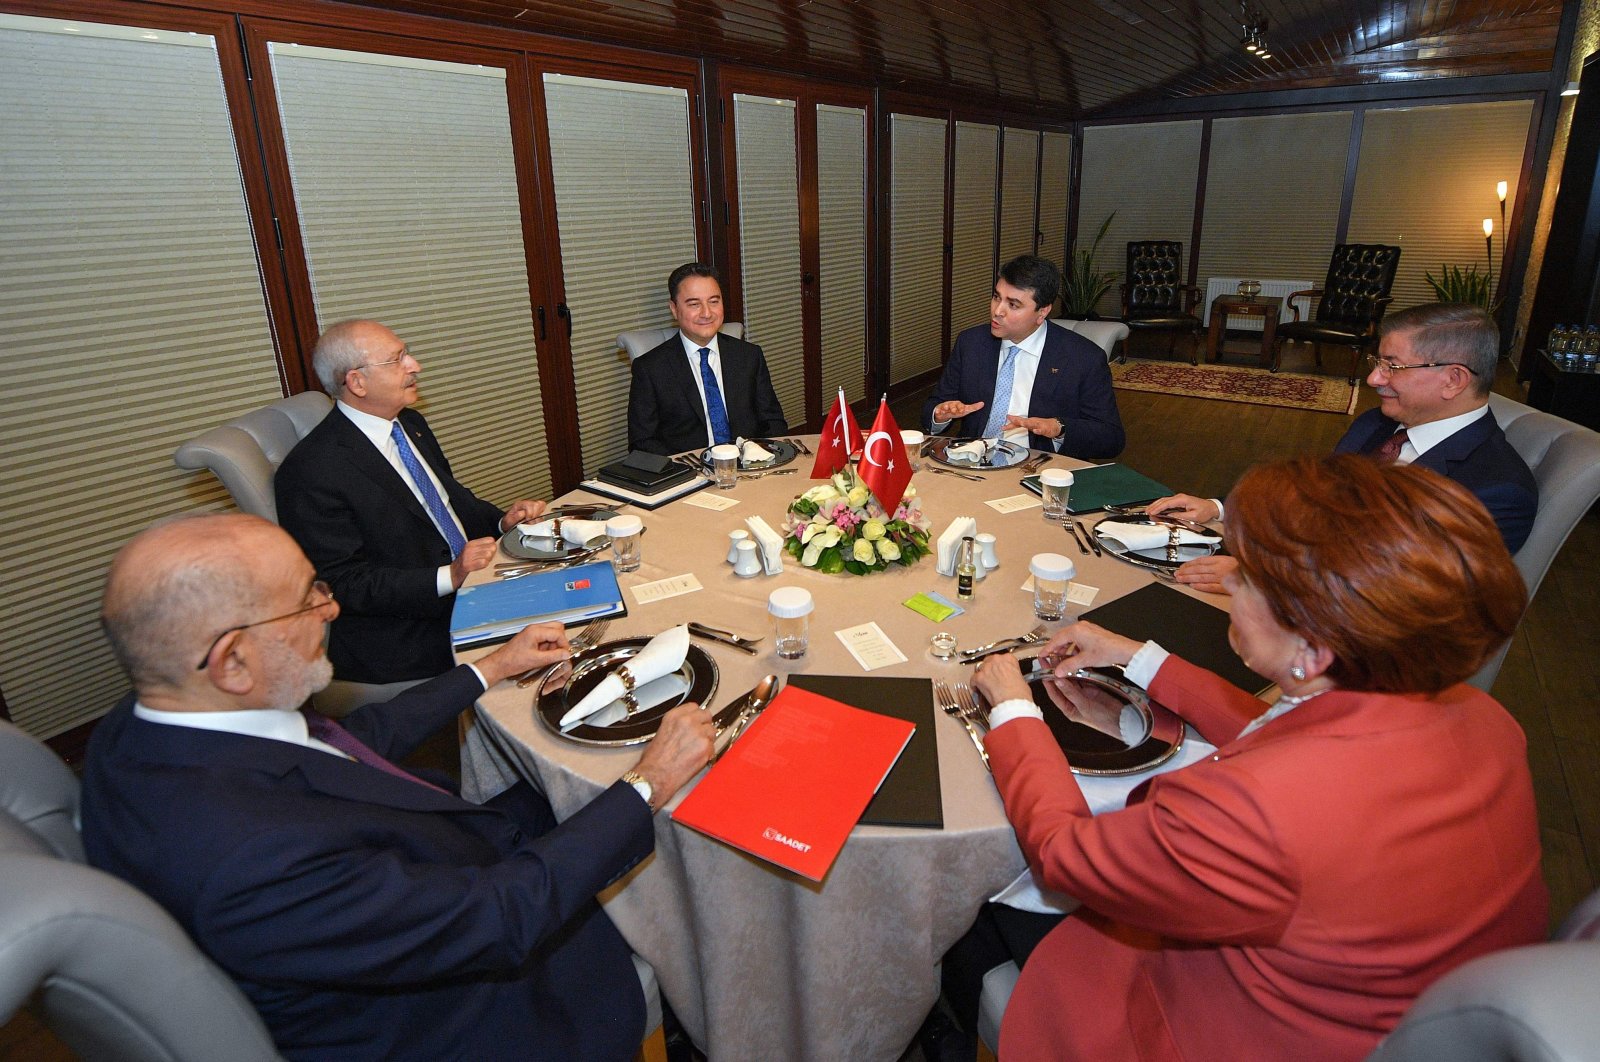 Representatives from Turkey&#039;s six opposition parties (L-R): The Felicity Party (SP) Chairperson Temel Karamollaoğlu, the Republican People&#039;s Party (CHP) Chairperson Kemal Kılıçdaroğlu, Democracy and Progress Party (DEVA)  Chairperson Ali Babacan, Democrat Party (DP) Chairperson Gültekin Uysal, Future Party (GP) Chairperson Ahmet Davutoğlu and Good Party (IP) Chairperson Meral Akşener pose ahead of a meeting at the Çankaya Municipality facilities, in capital Ankara, Turkey, Feb. 12, 2022. (AFP Photo)